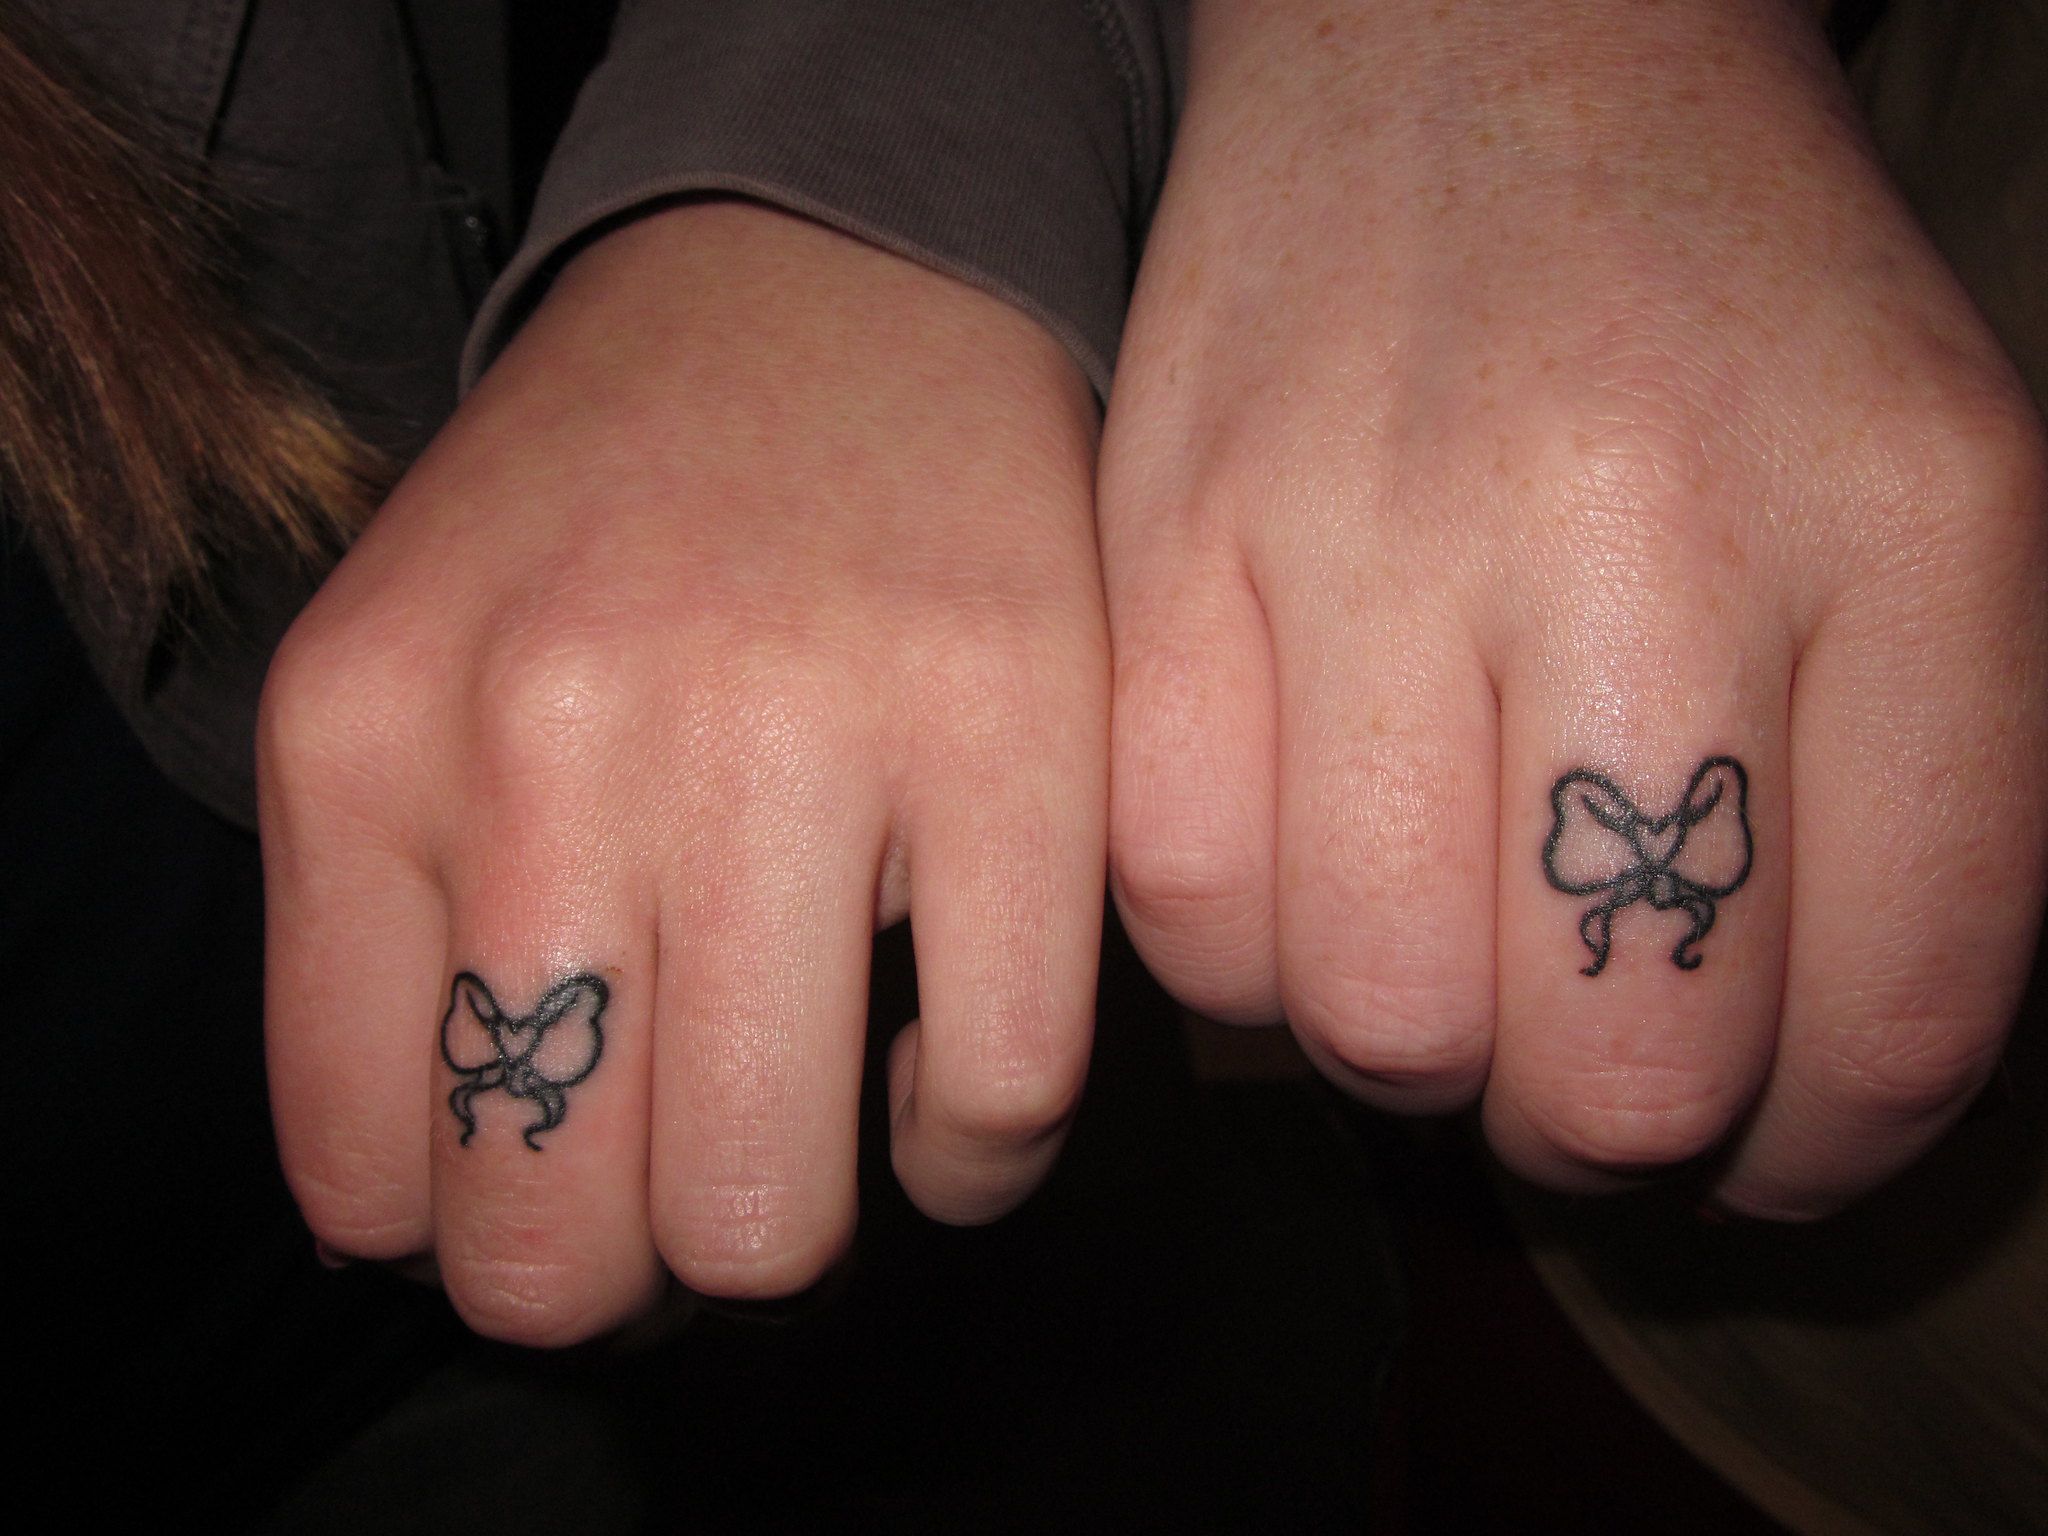 Finger Tattoos Are The Newest Trend, And We've Collected Some Amazing Ideas  For You To Check | Bored Panda